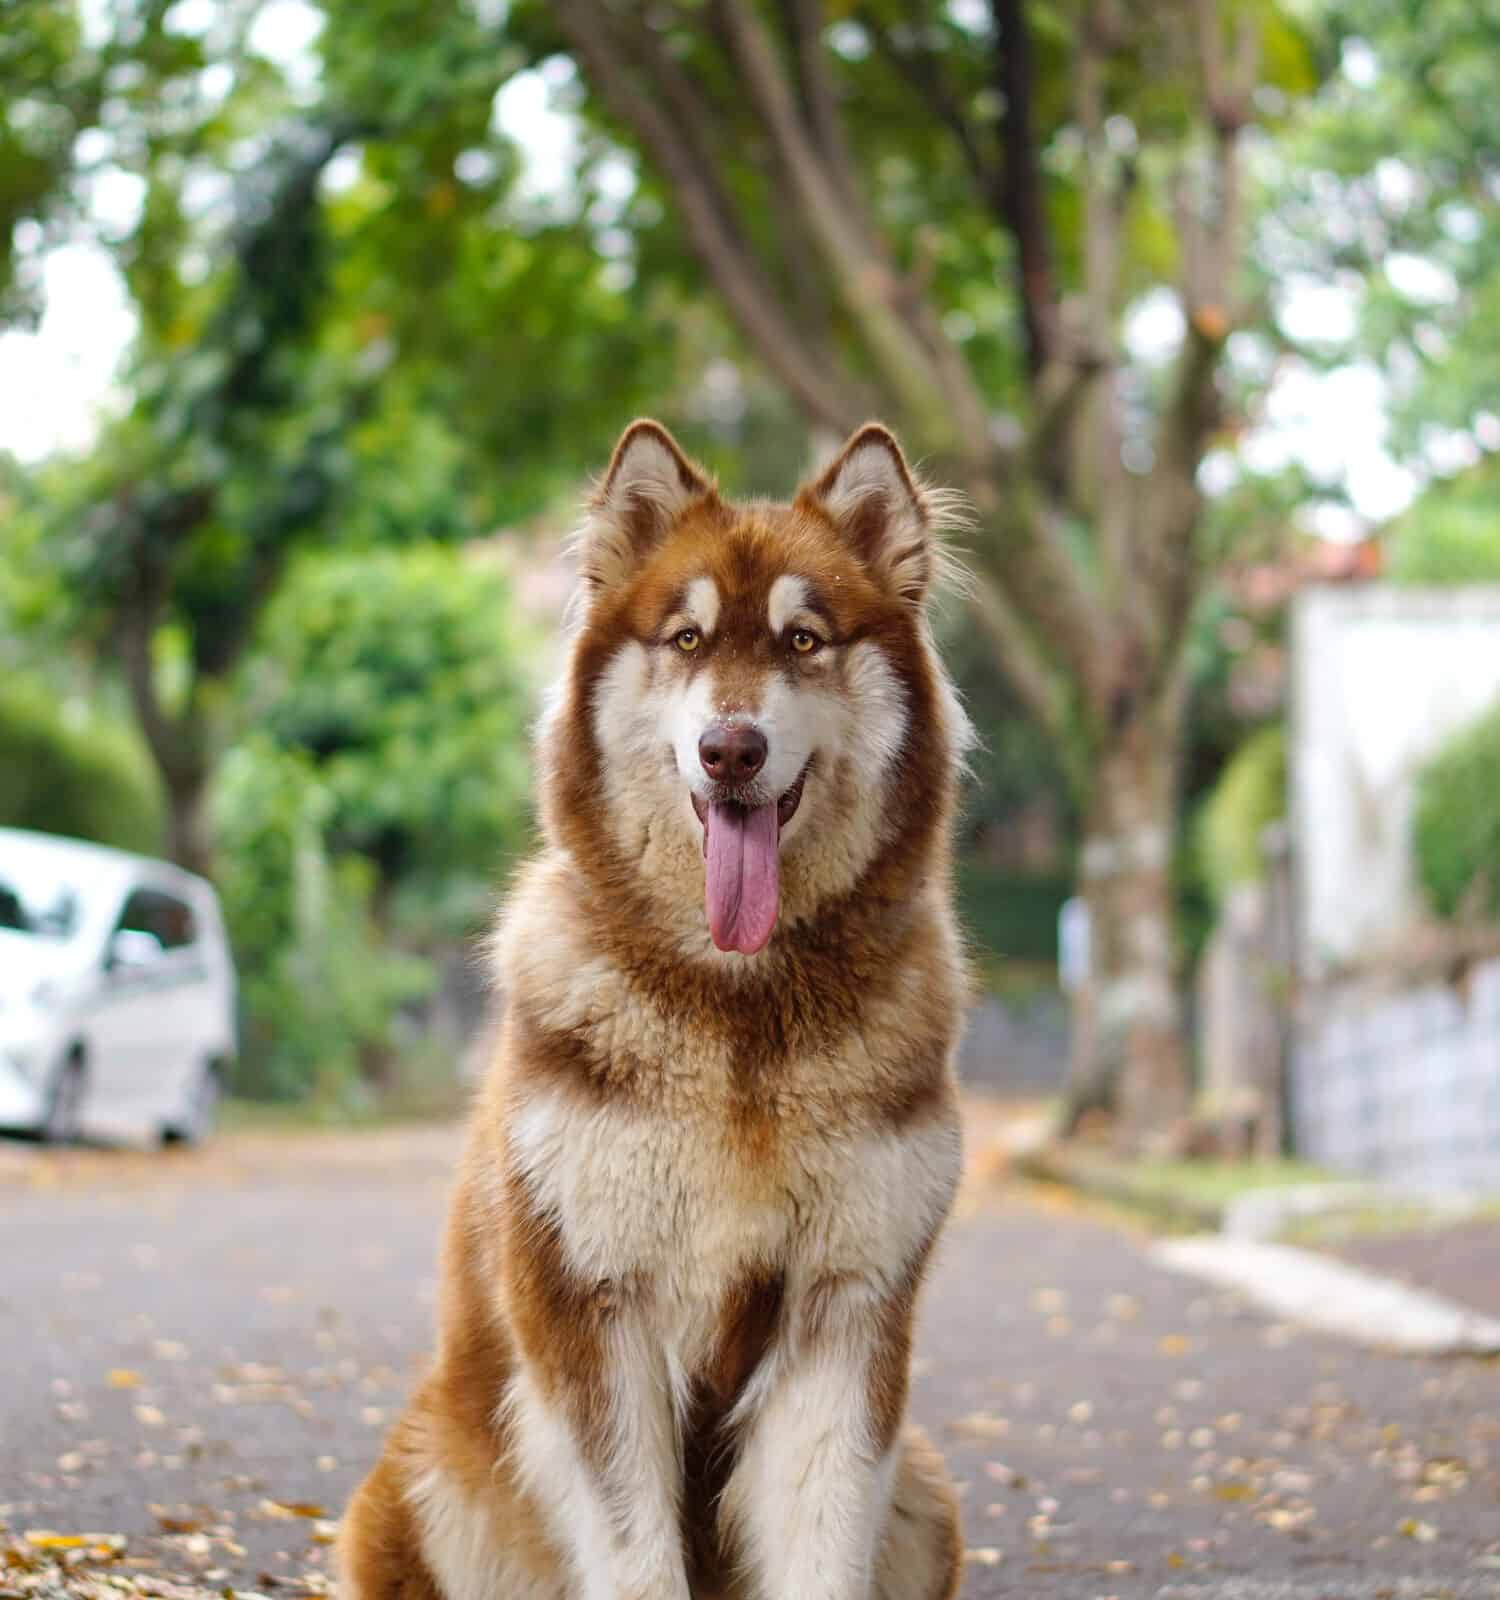 The handsome alaskan malamute is sitting on the dry leaves